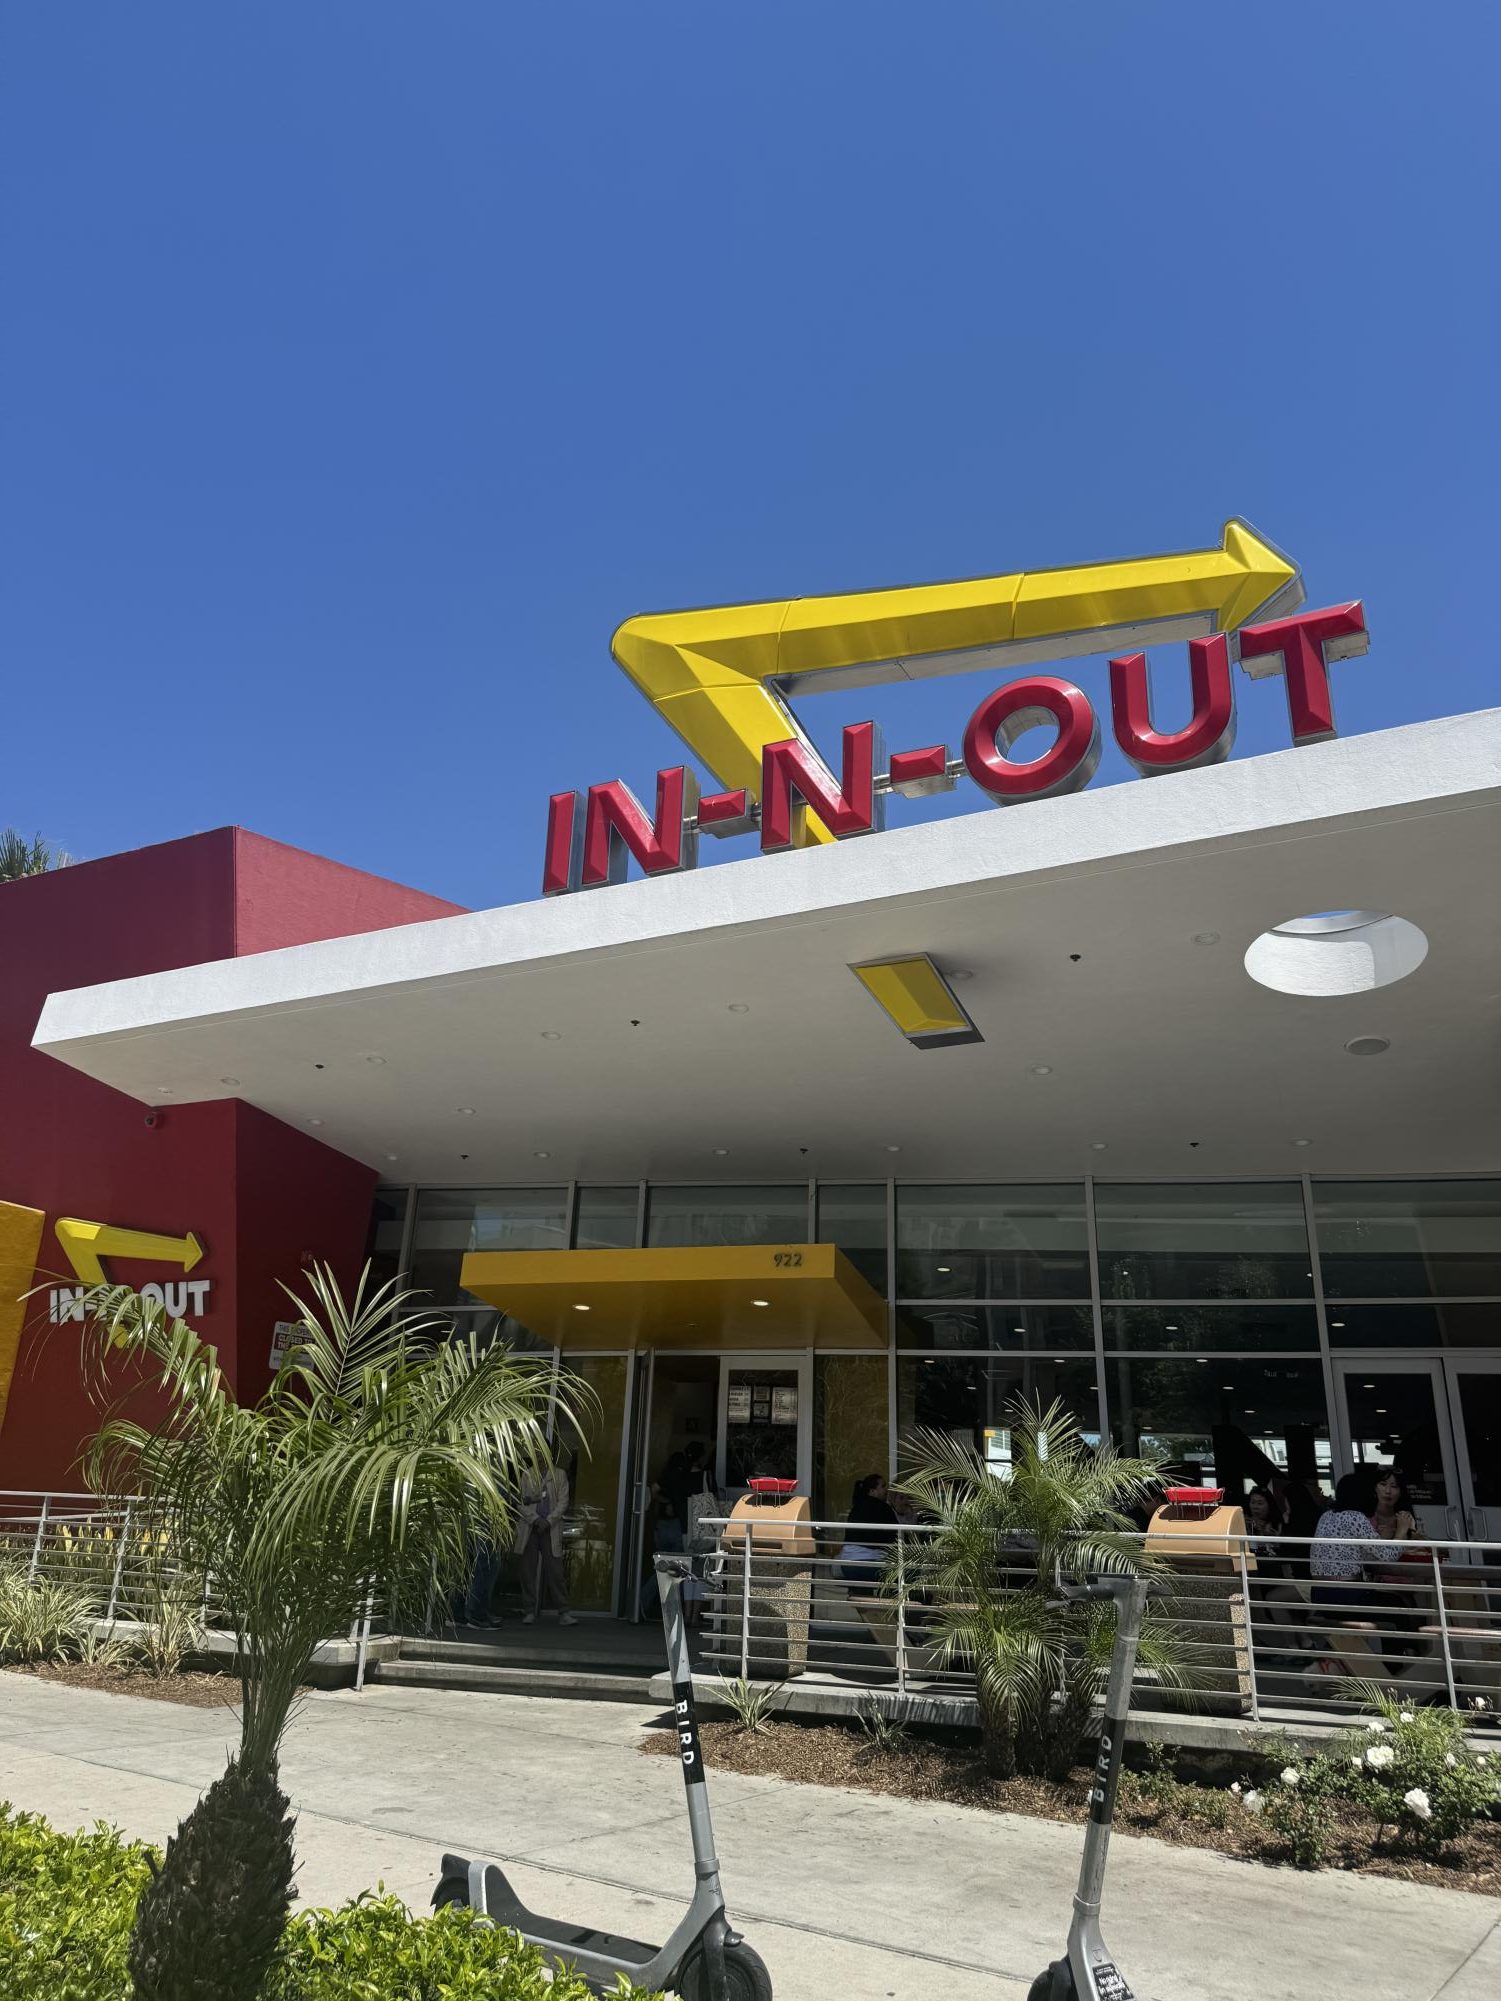 In-N-Out Burger Westwood Village serves burgers, fries and drinks — a seemingly basic menu, but one that has been a staple in L.A. for decades.  Whether you stop by for lunch or dinner, this L.A. classic is a must-see location.